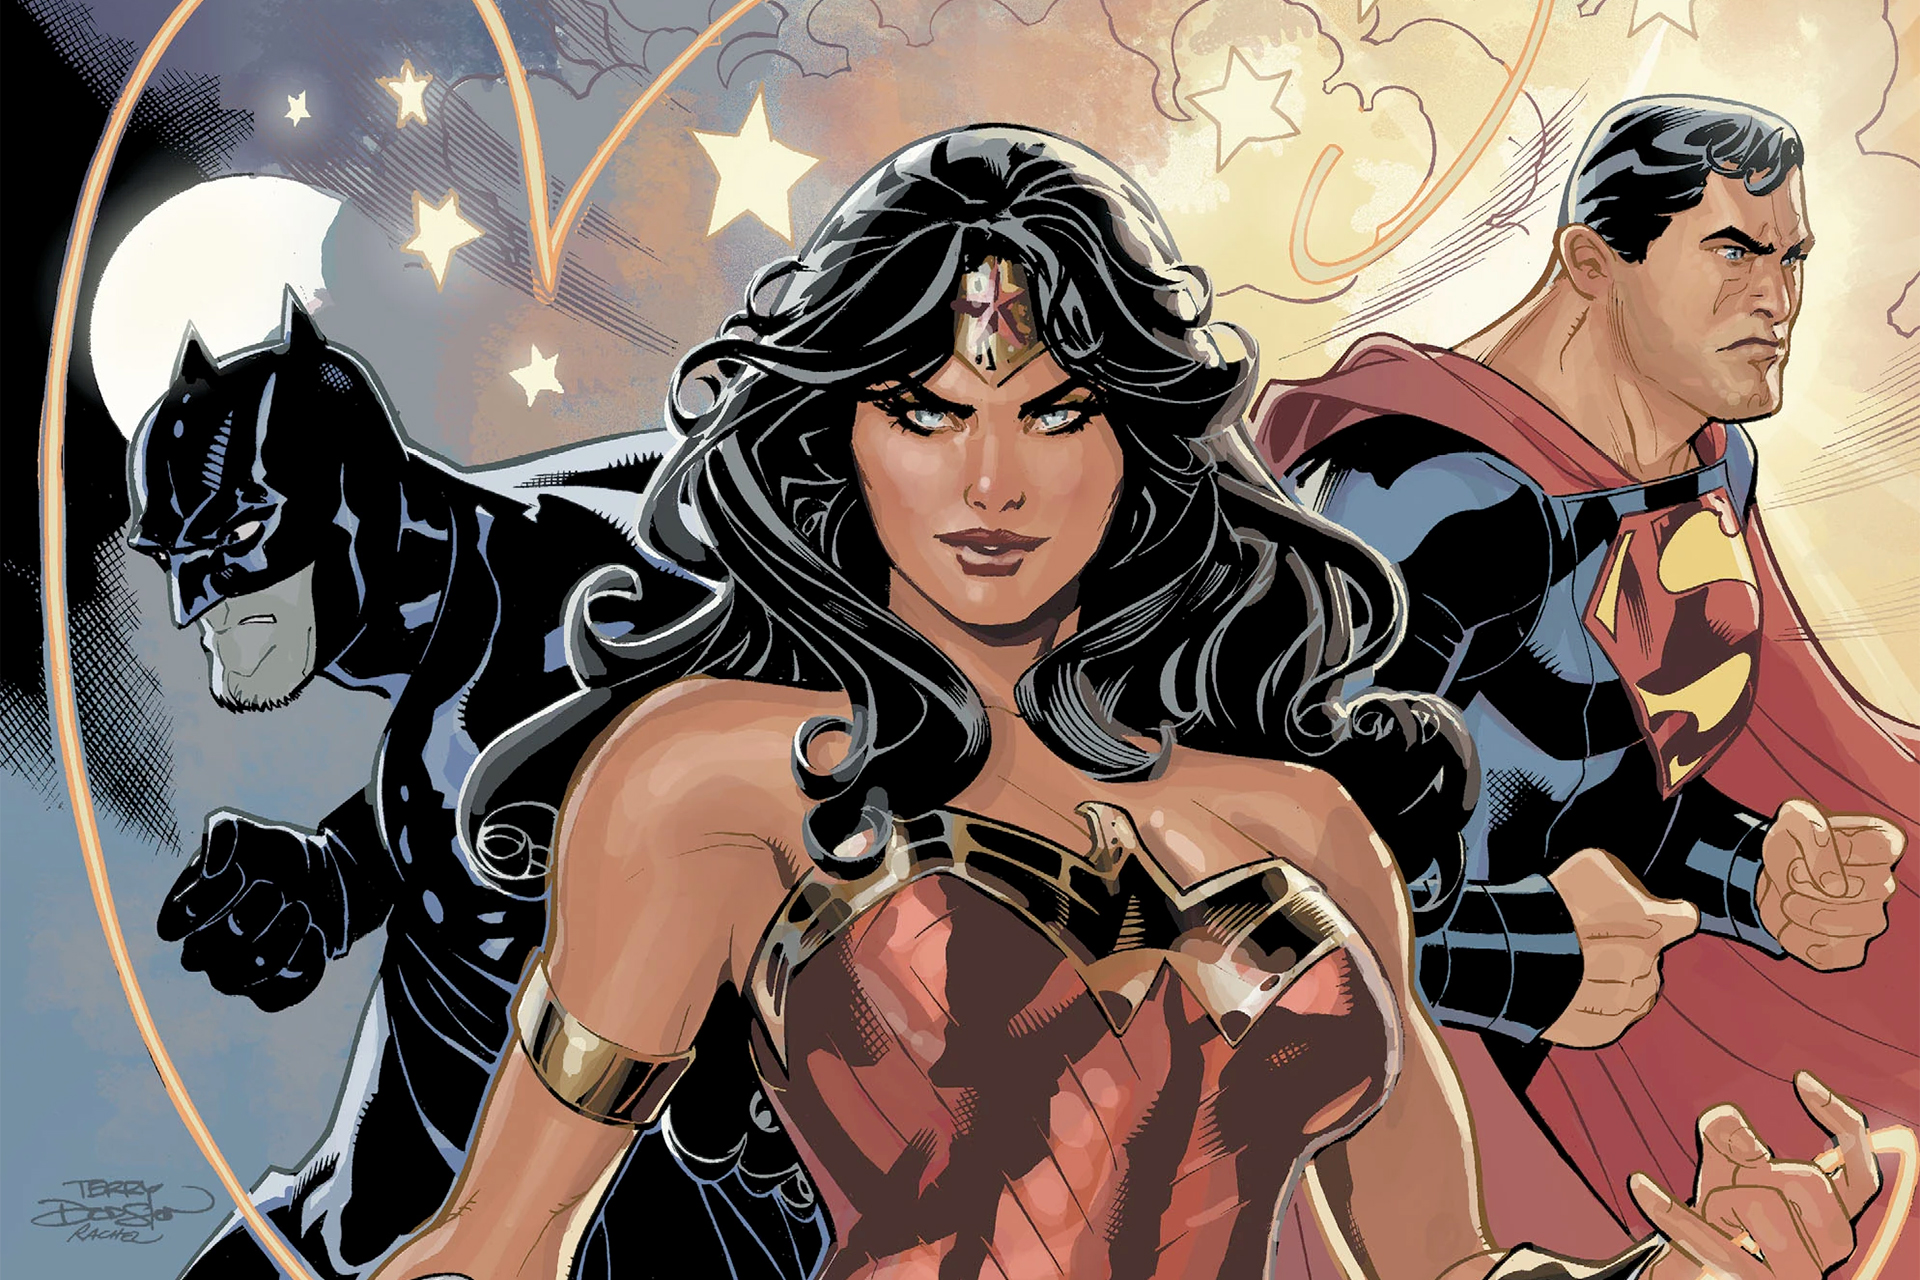 Batman, Wonder Woman, and Superman stand side by side in cover artwork from Justice League (Volume 4) #28